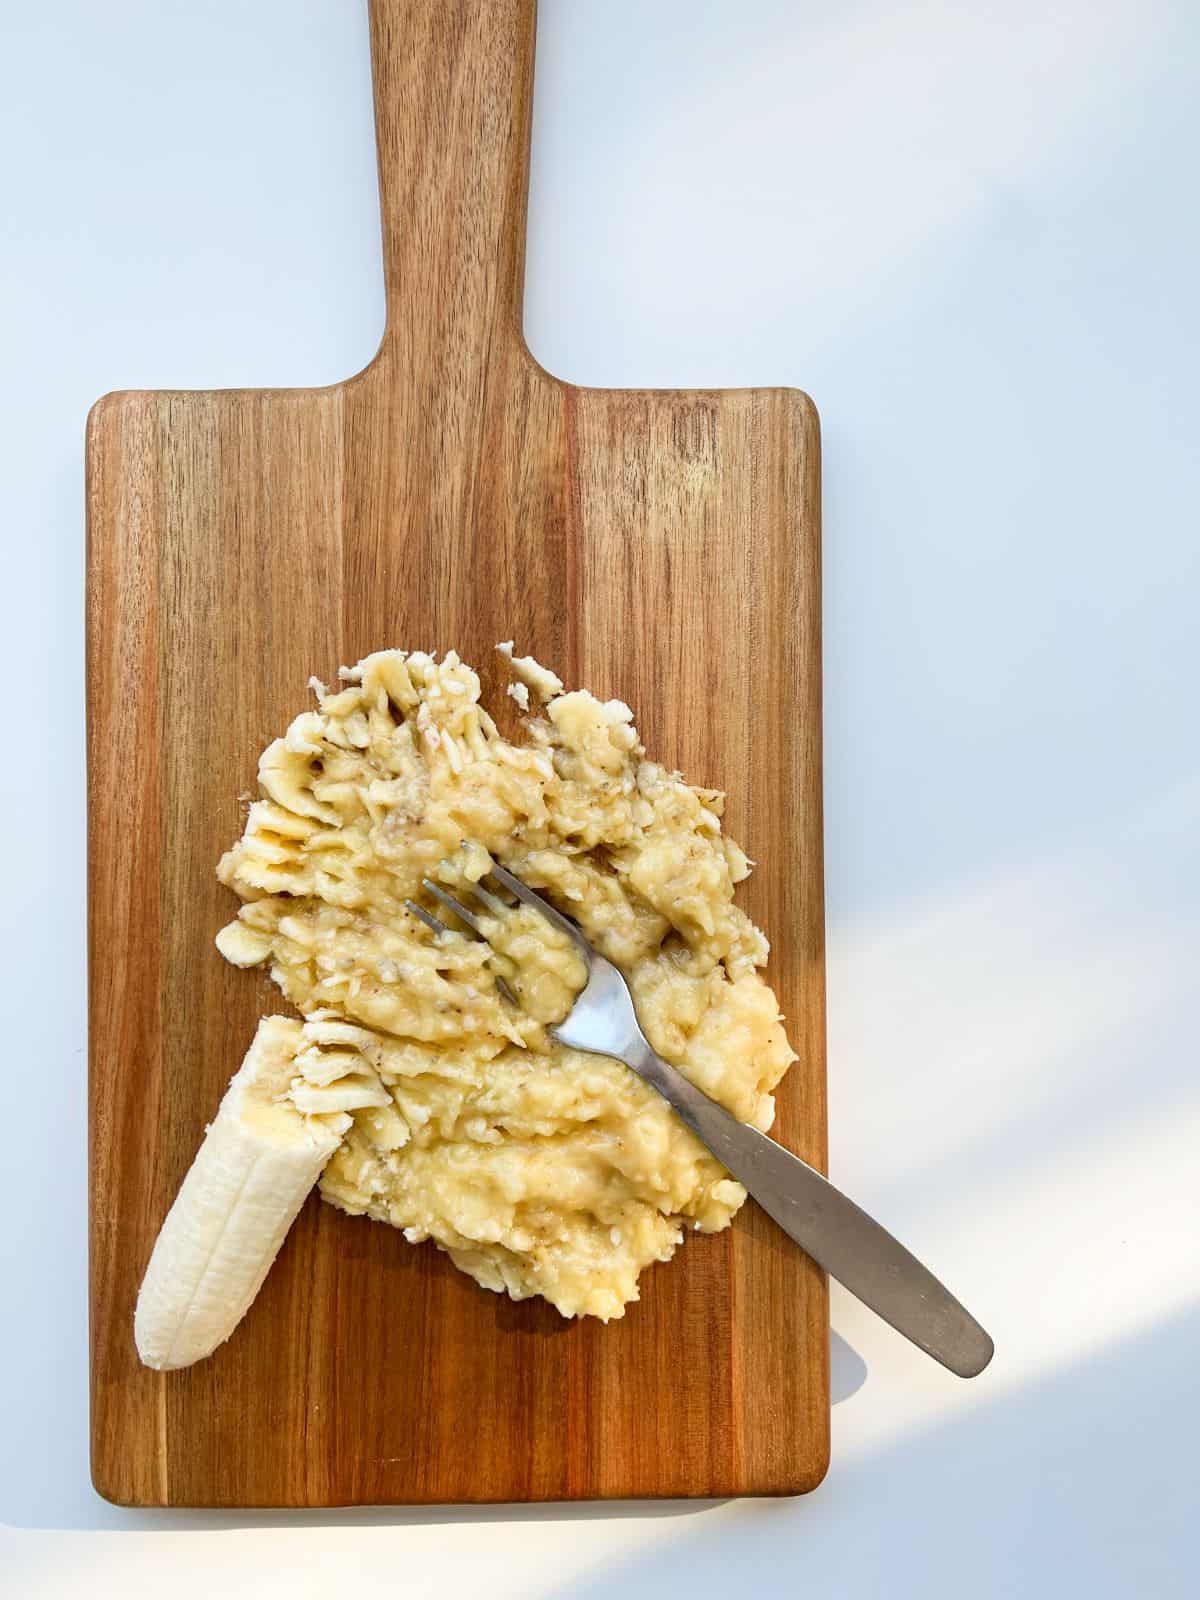 An image of banana mashed with a fork on a wooden cutting board.